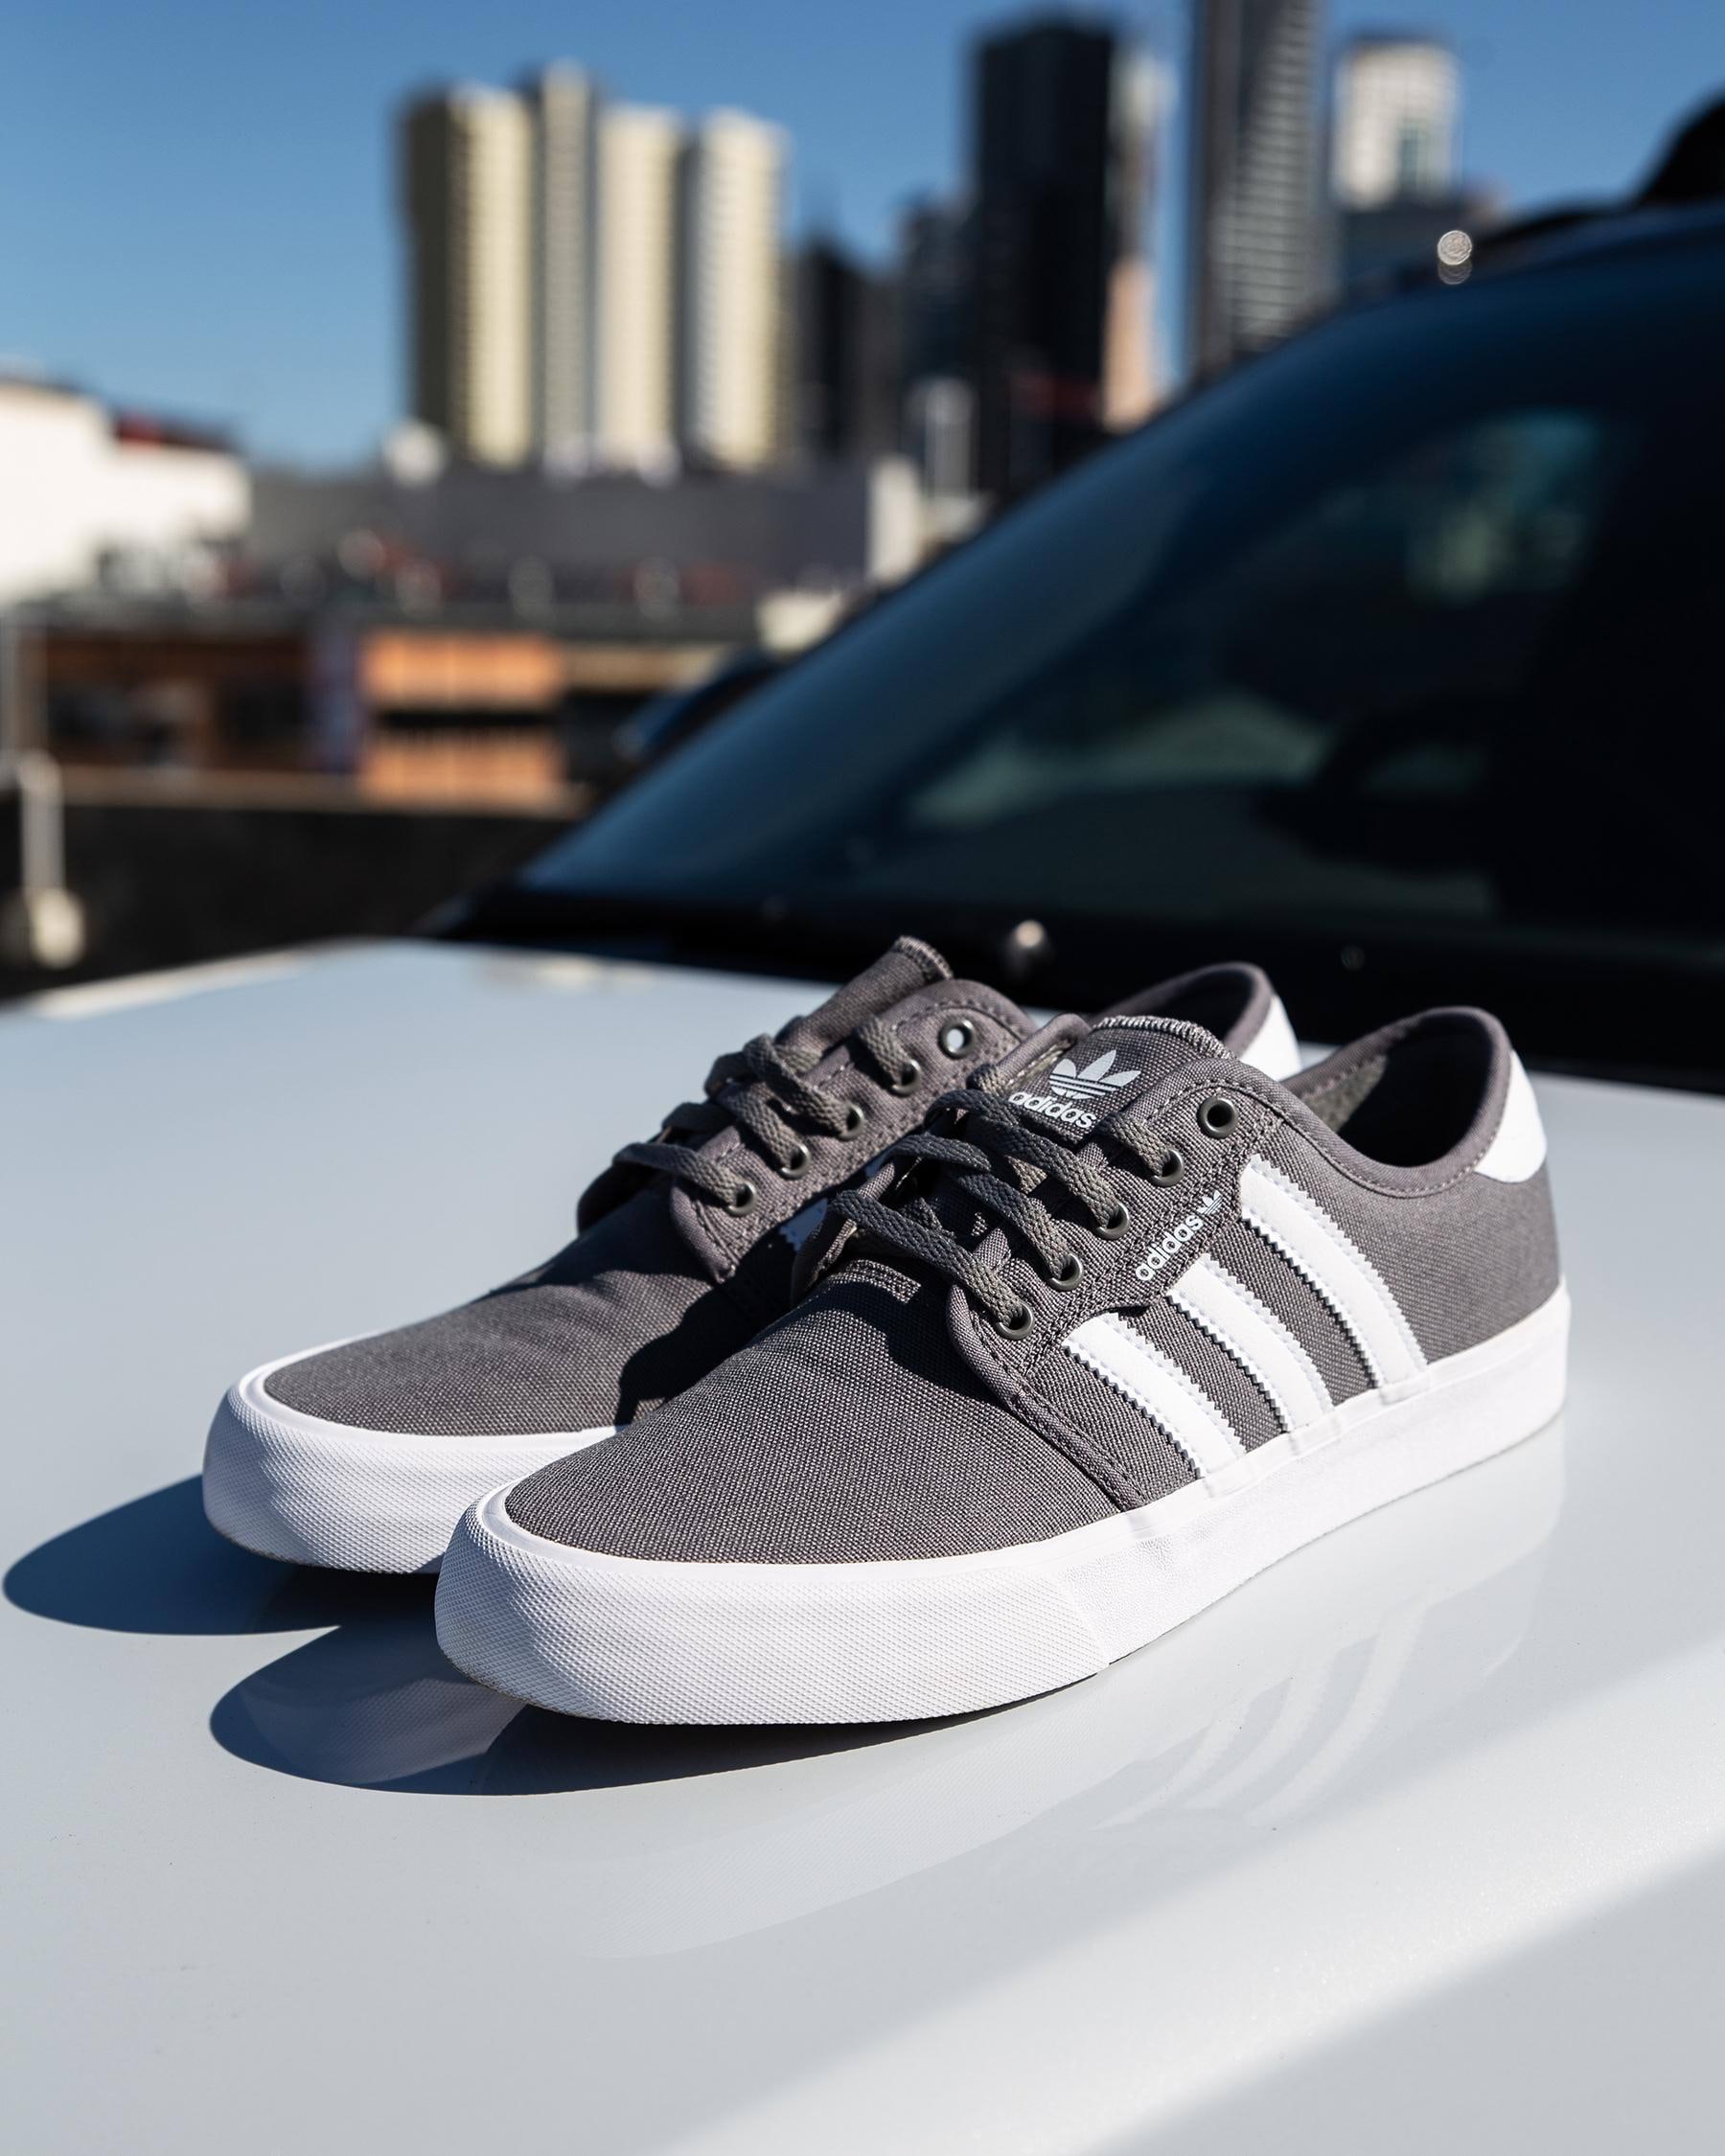 Adidas Seeley XT Shoes In Grey/white - FREE* Shipping & Easy Returns - City  Beach United States